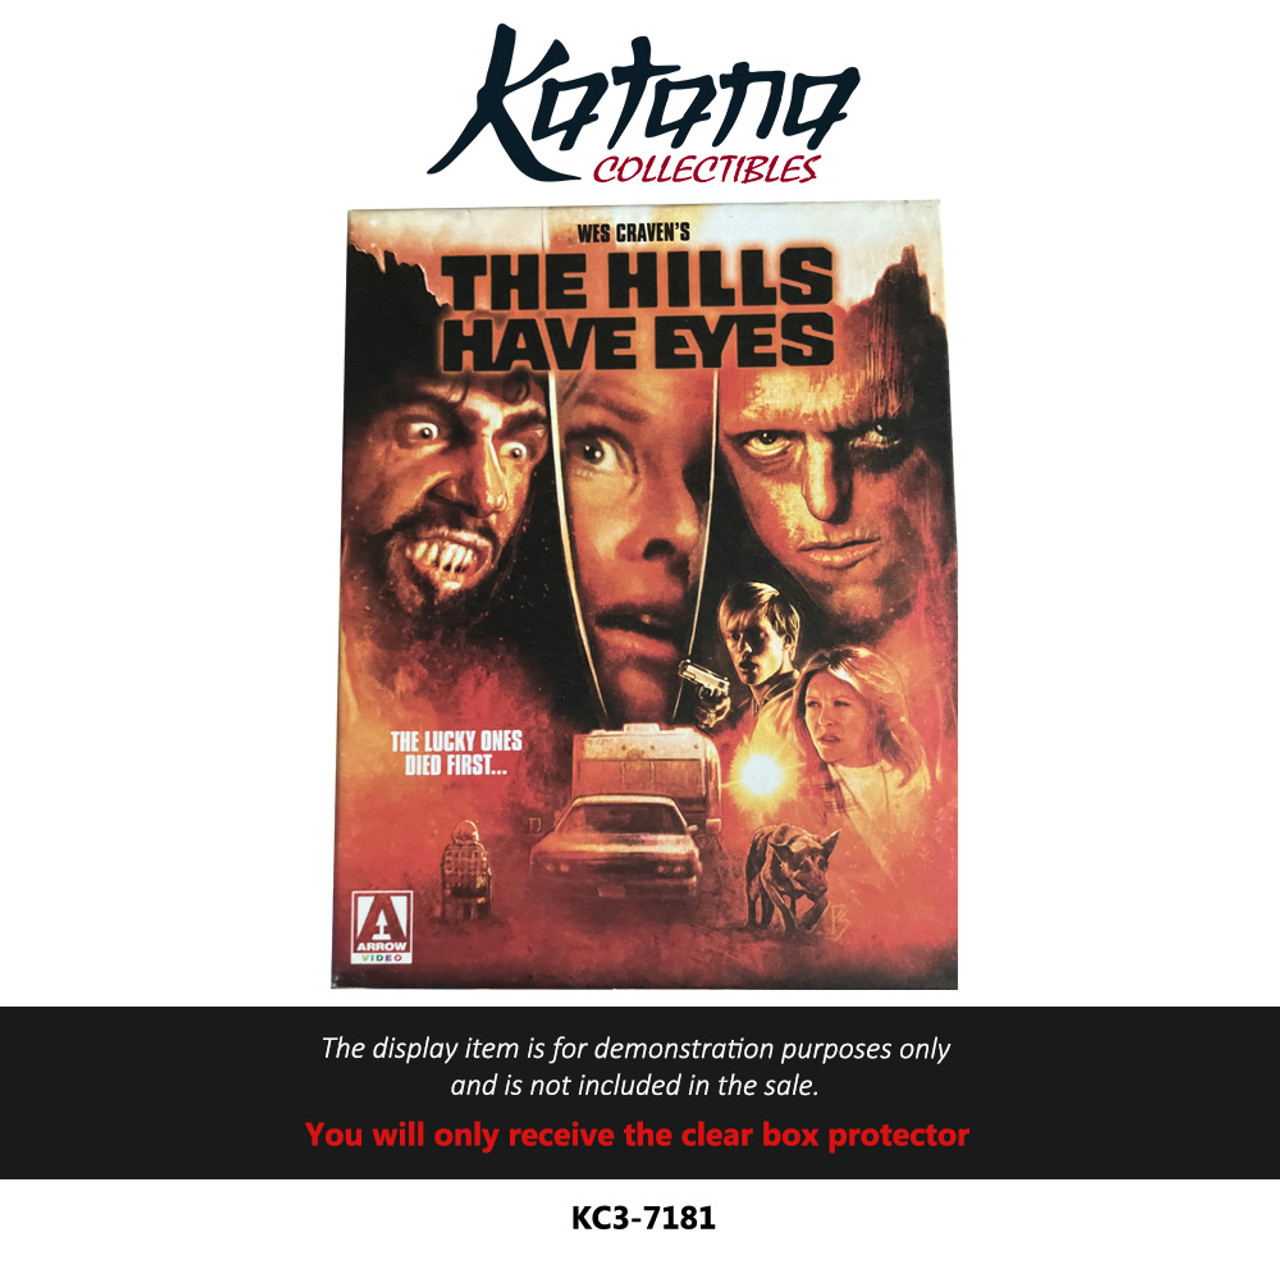 Katana Collectibles Protector For The Hills Have Eyes Limited Edition Blu-ray Arrow